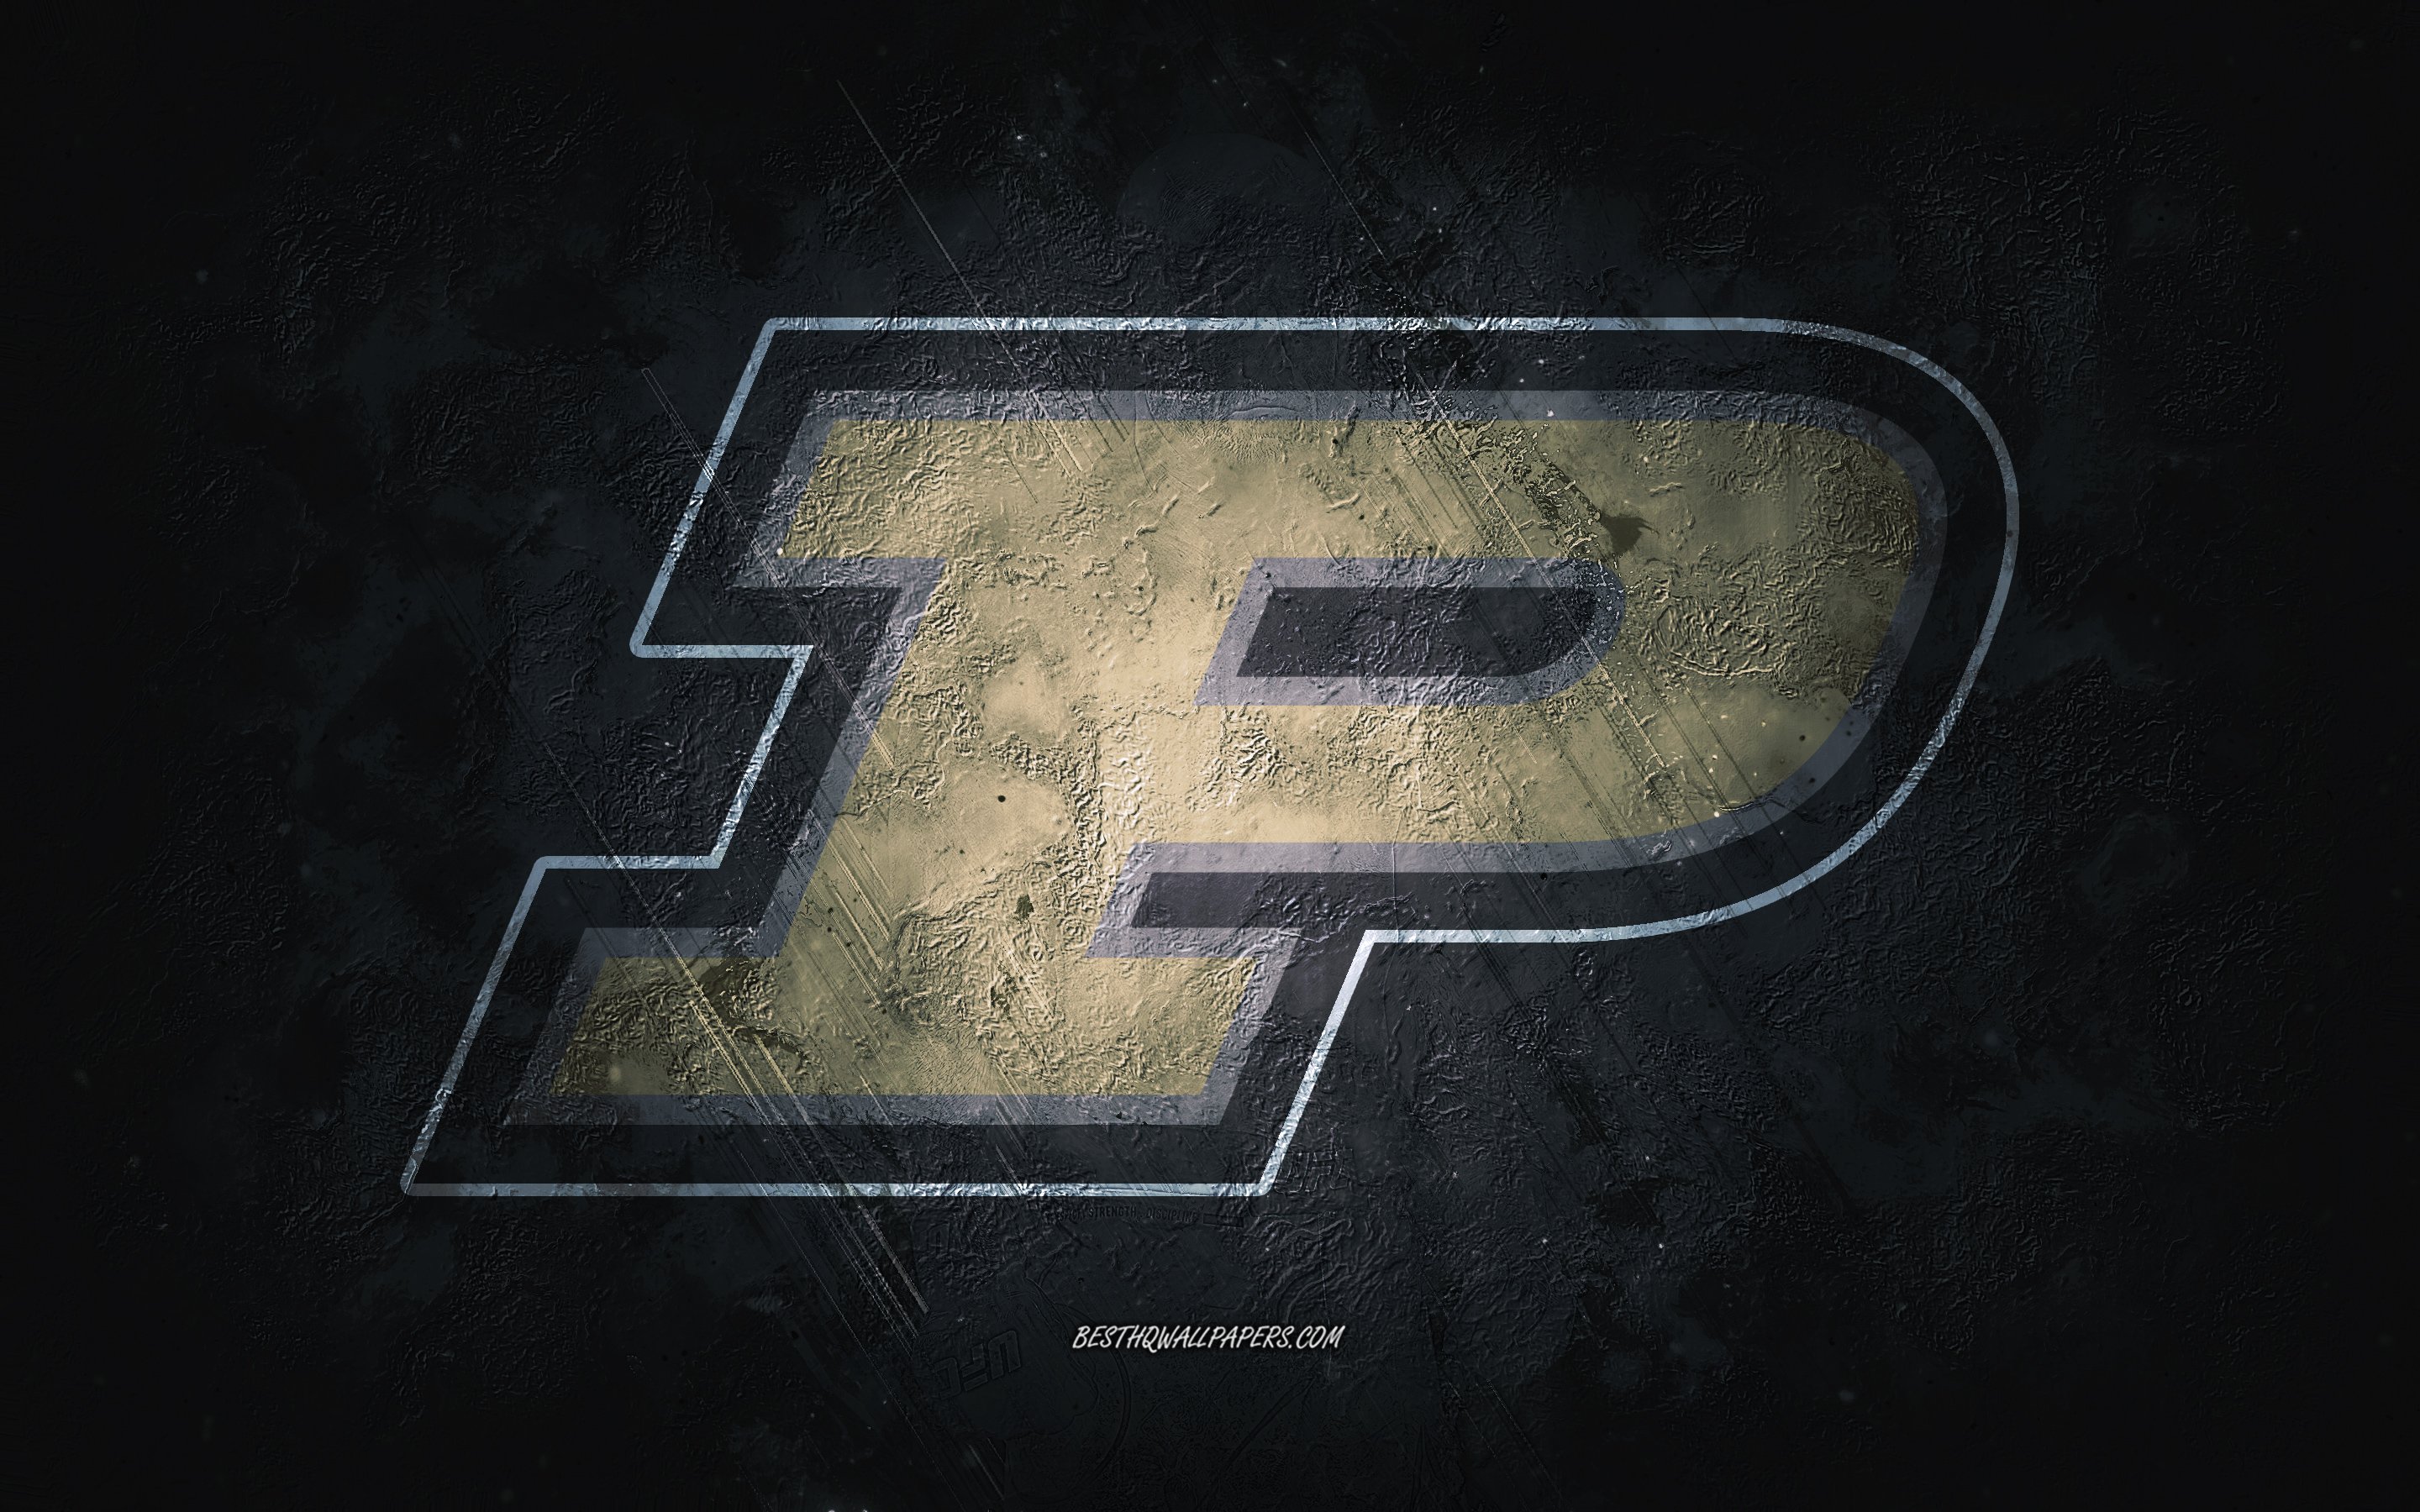 Download wallpaper Purdue Boilermakers, American football team, brown background, Purdue Boilermakers logo, grunge art, NCAA, American football, USA, Purdue Boilermakers emblem for desktop with resolution 2880x1800. High Quality HD picture wallpaper